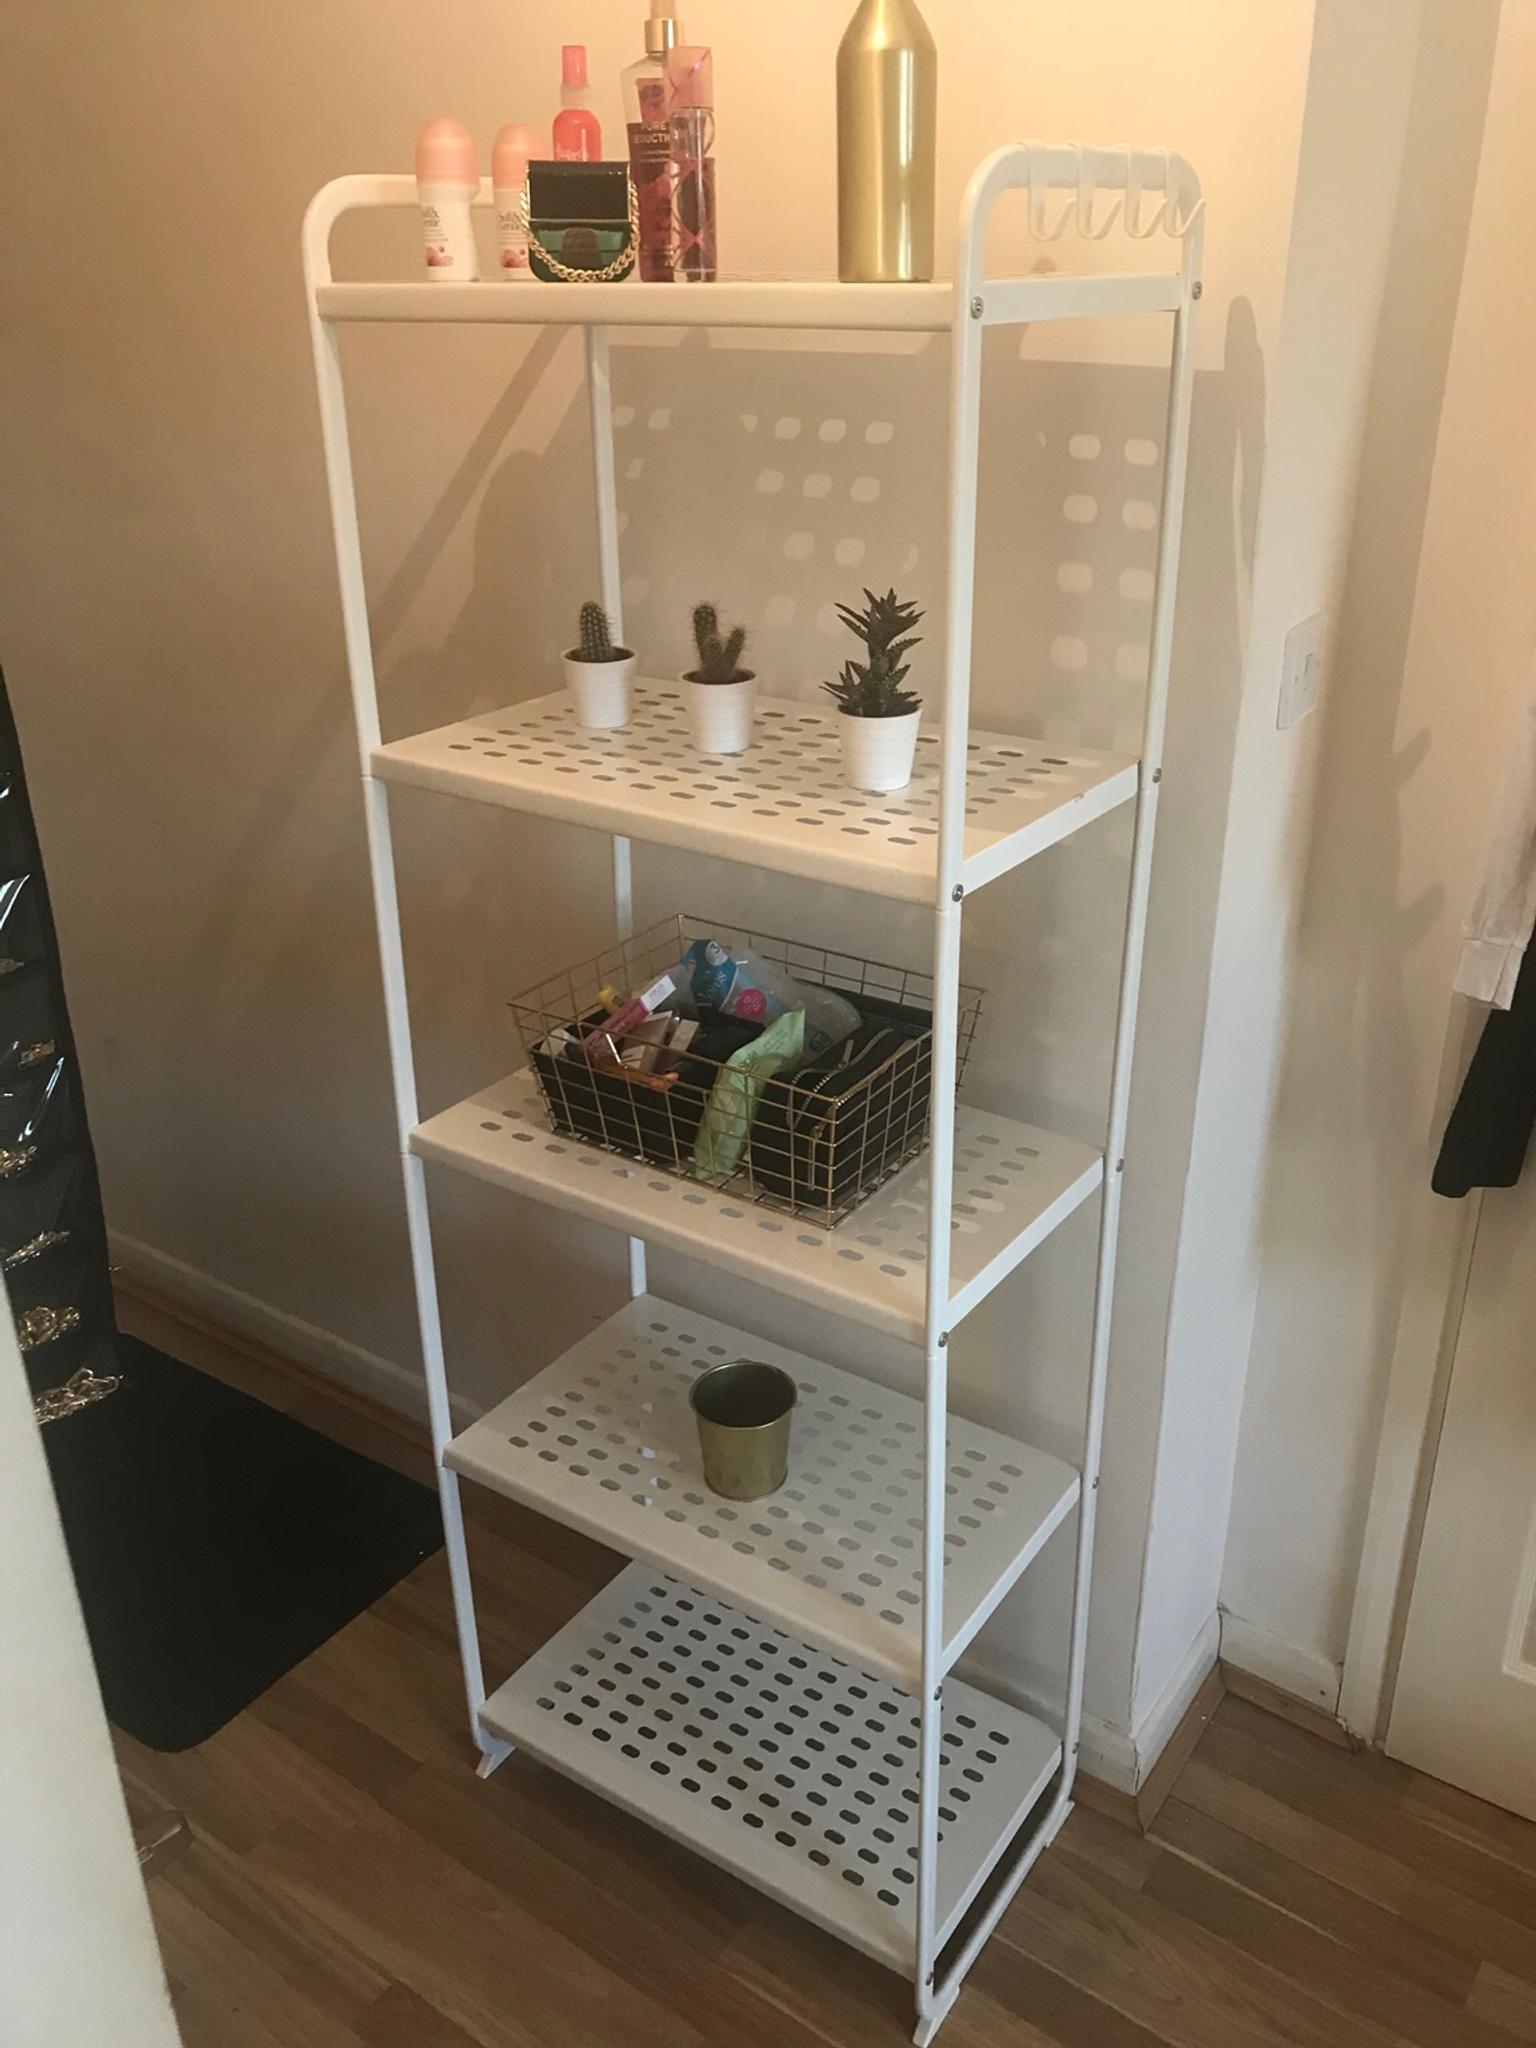 Ikea Mulig White Shelving Unit In Dy4 Sandwell For 10 00 For